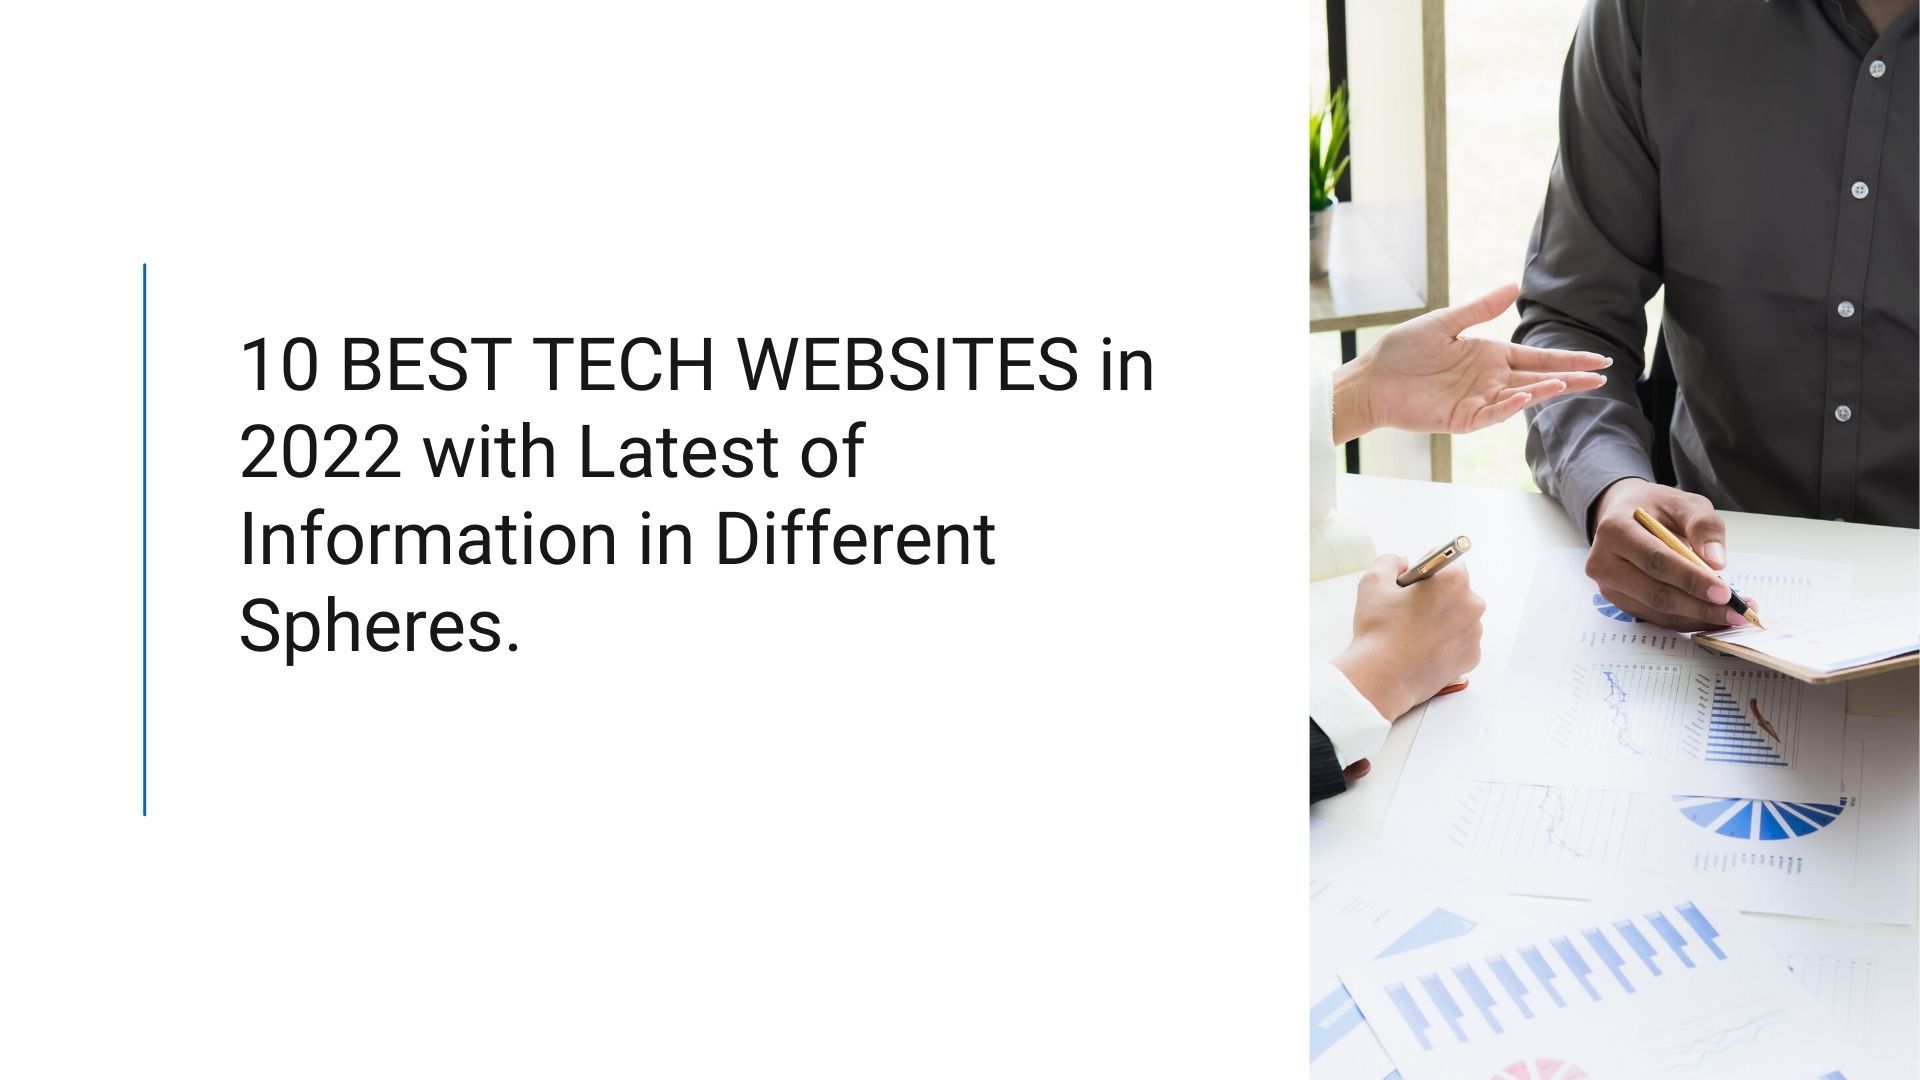 10 BEST TECH WEBSITES in 2022 with latest of information in different spheres. 